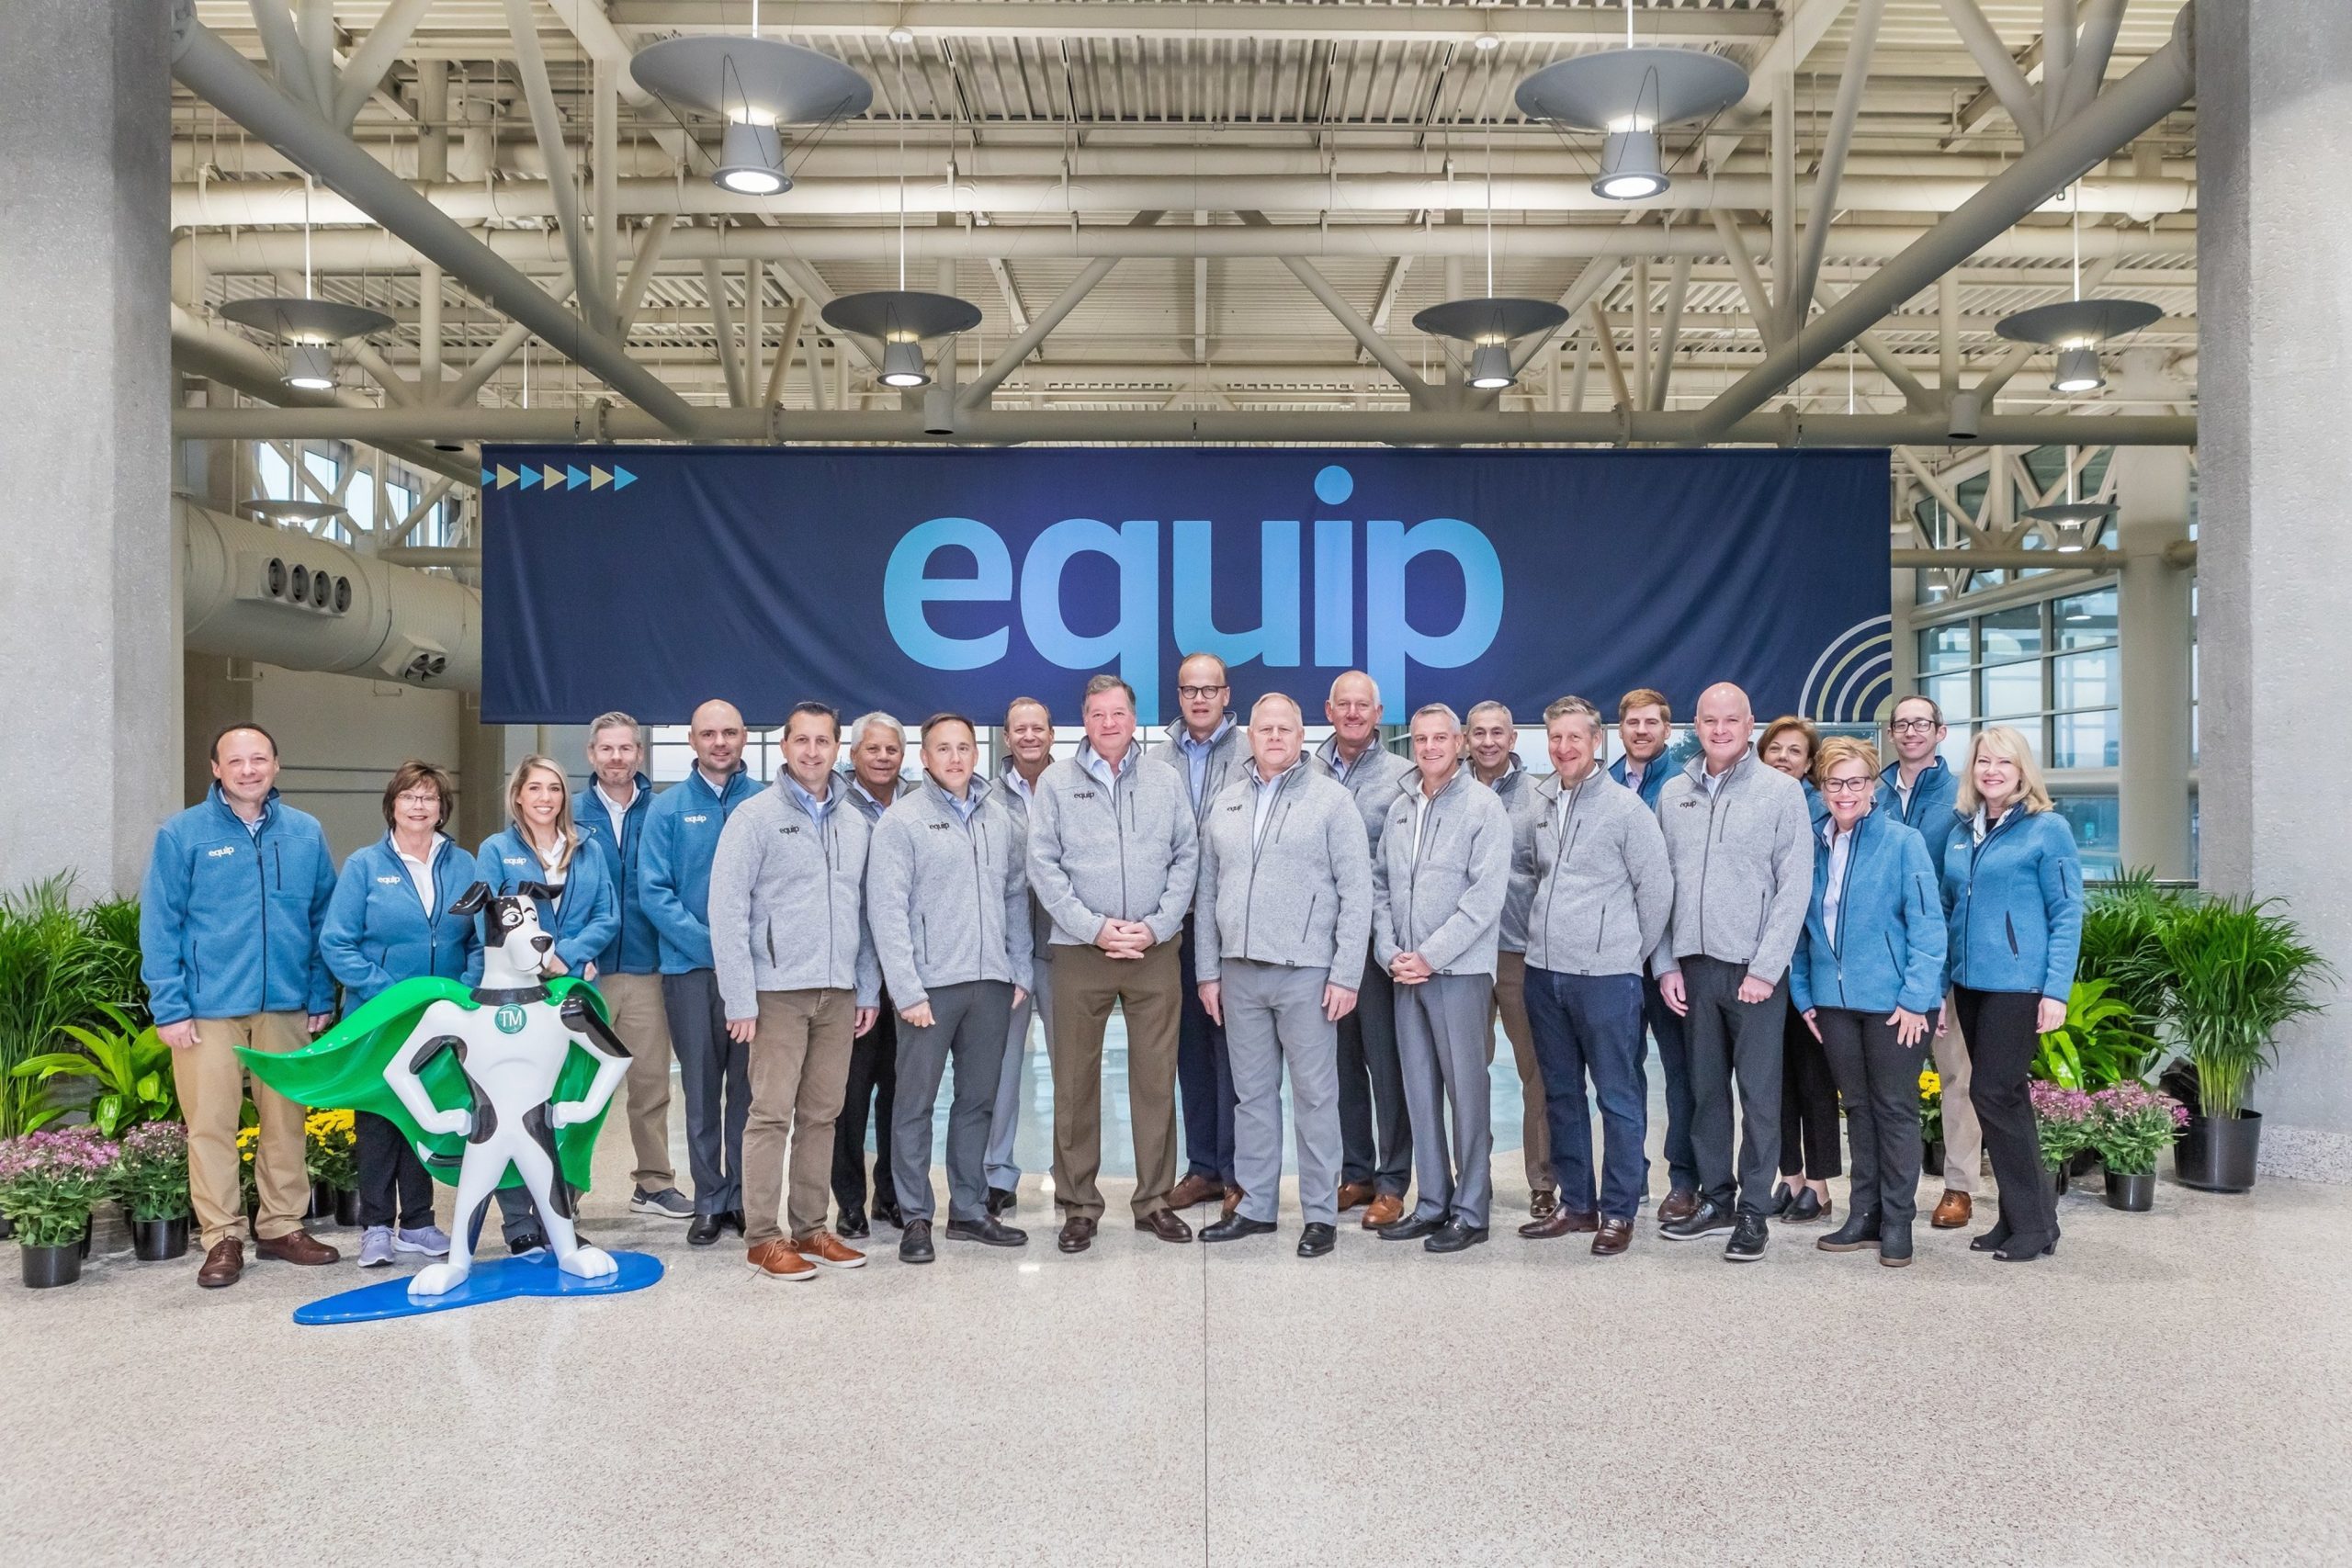 The Outdoor Power Equipment Institute (OPEI) Board of Directors and staff are pictured. OPEI announces that GIE+EXPO will rebrand and relaunch in 2022 as Equip Exposition